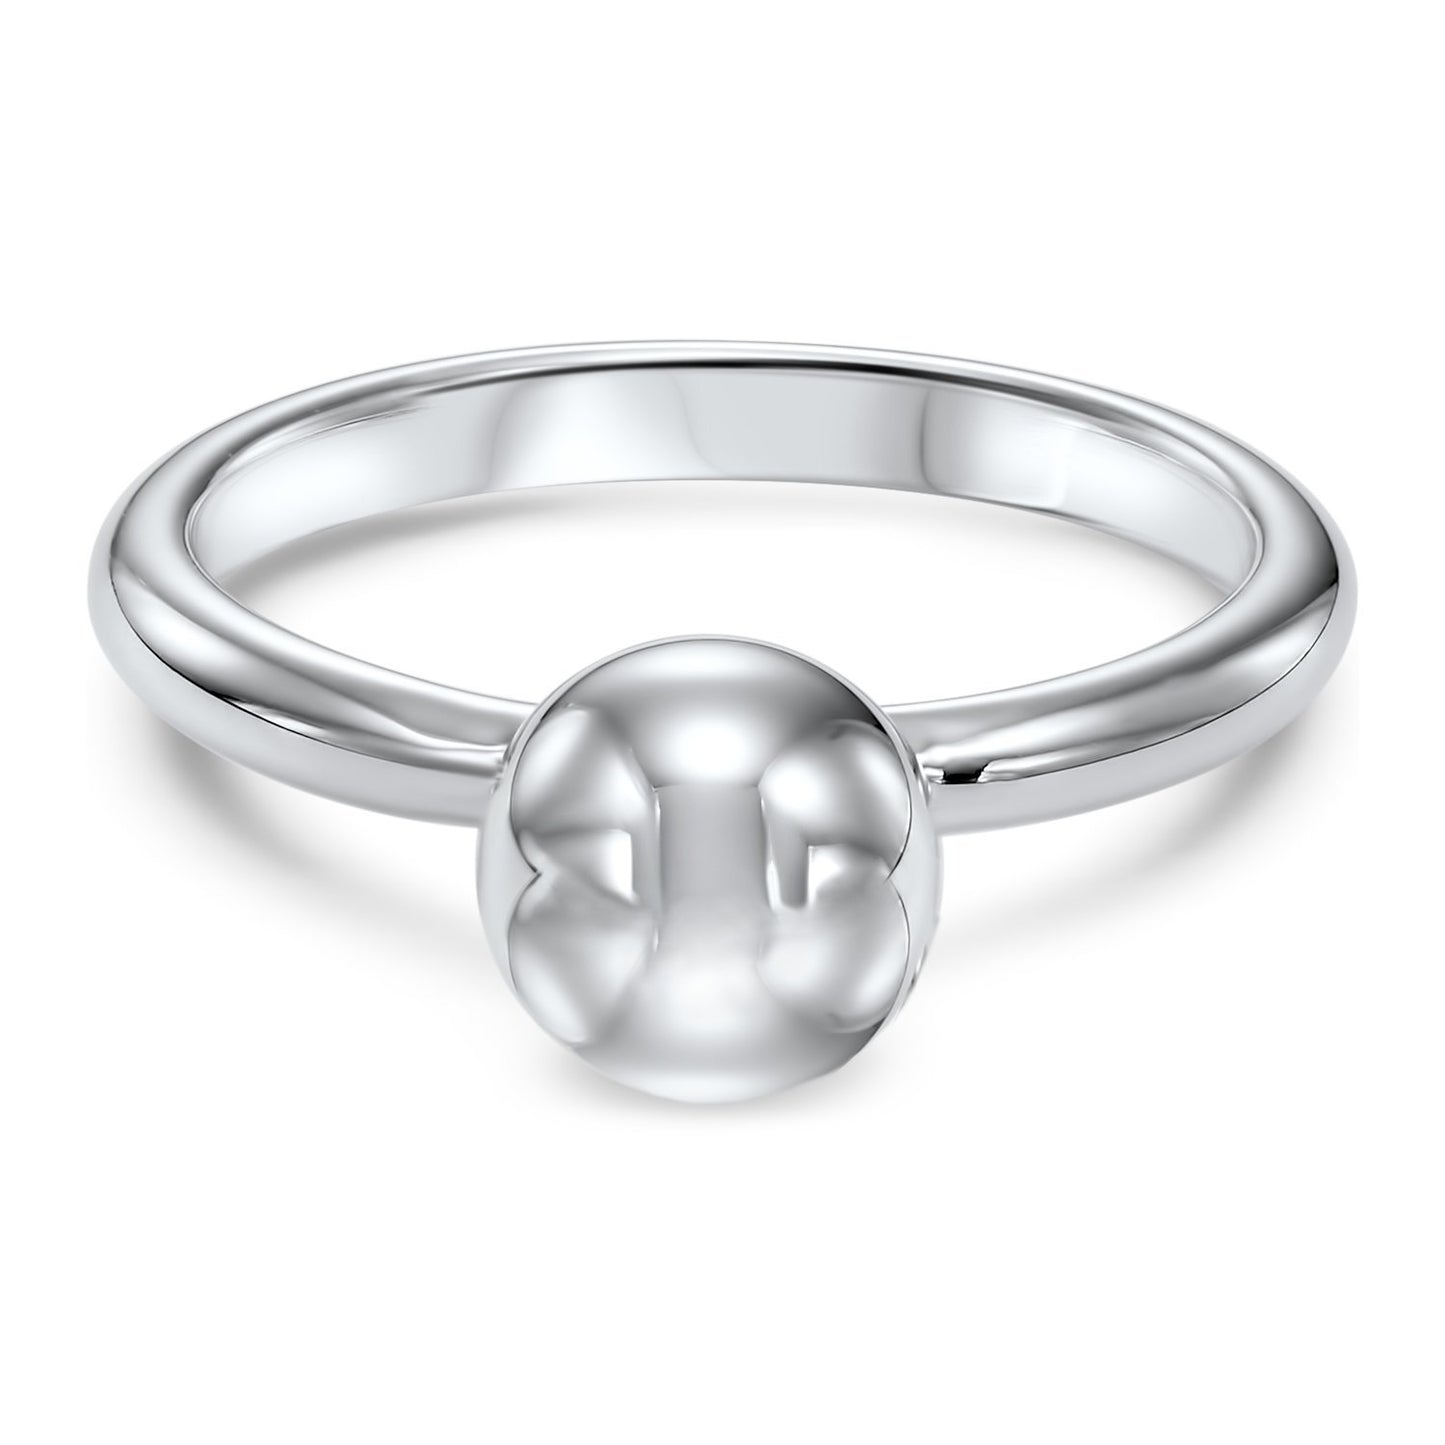 Silver Spherical Polished Ring